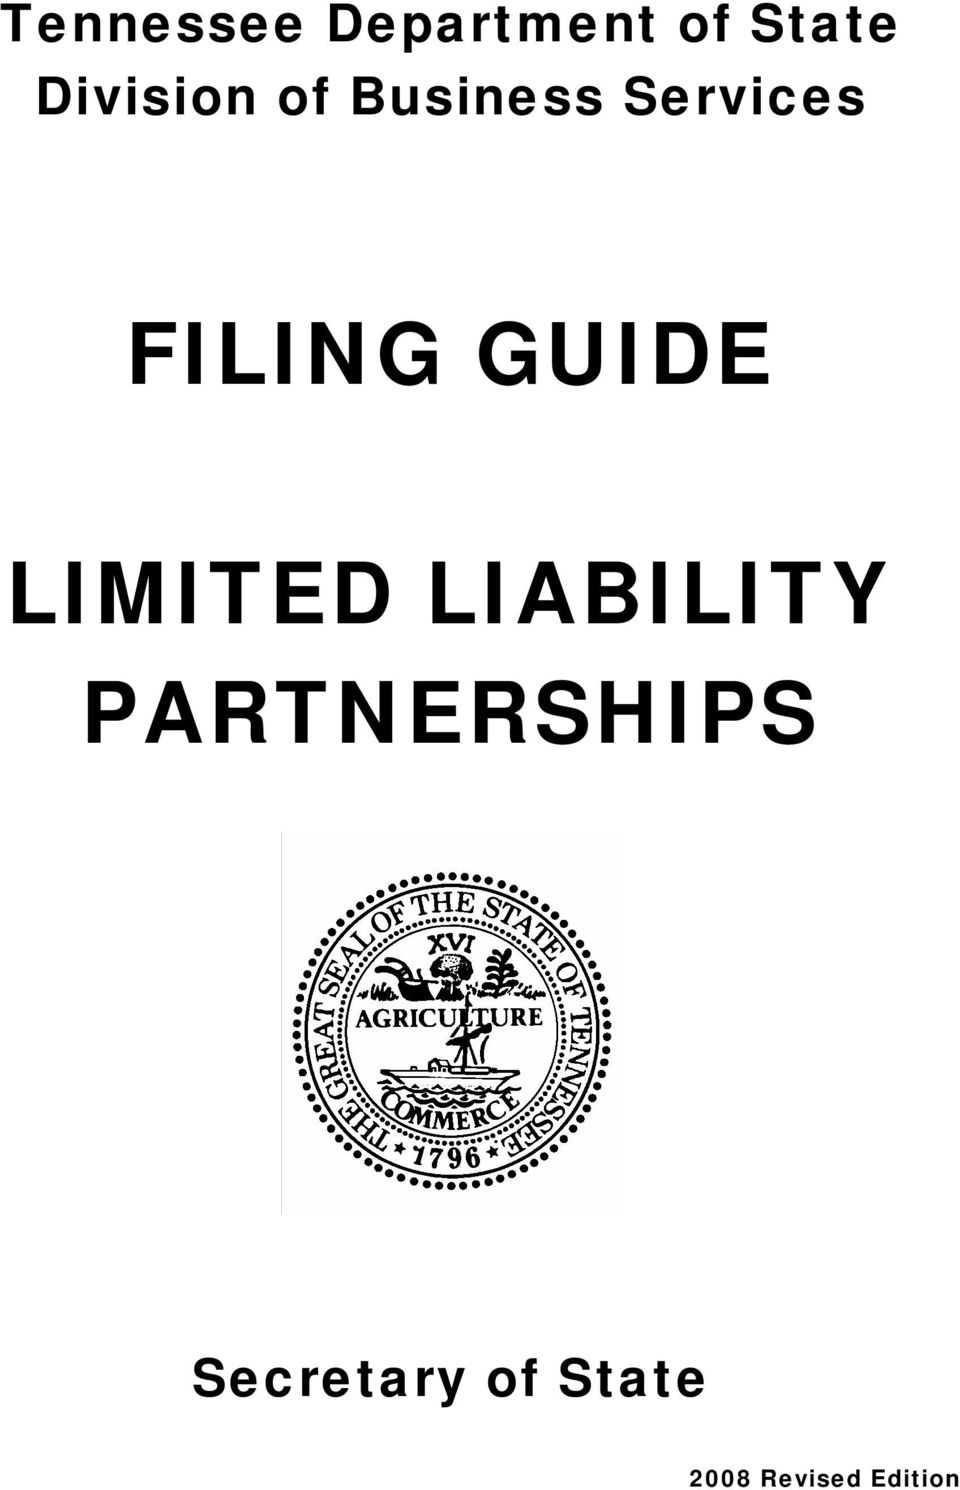 FILING GUIDE LIMITED LIABILITY